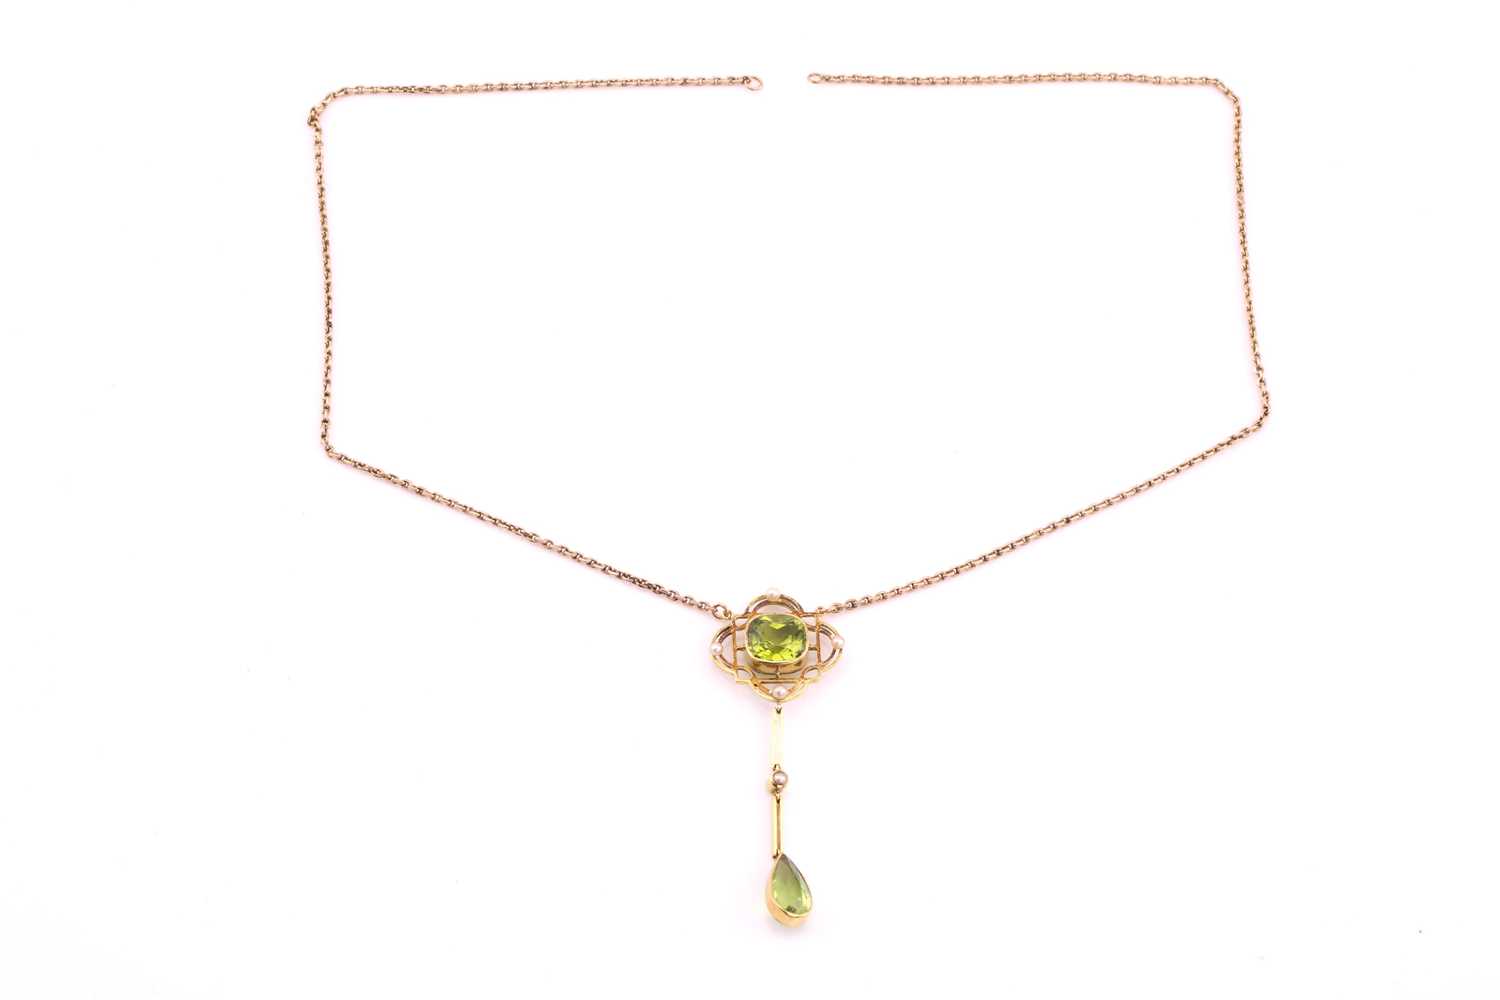 A peridot pendant necklace, early 20th century, the pendant centred by a cushion shape peridot, - Image 2 of 3